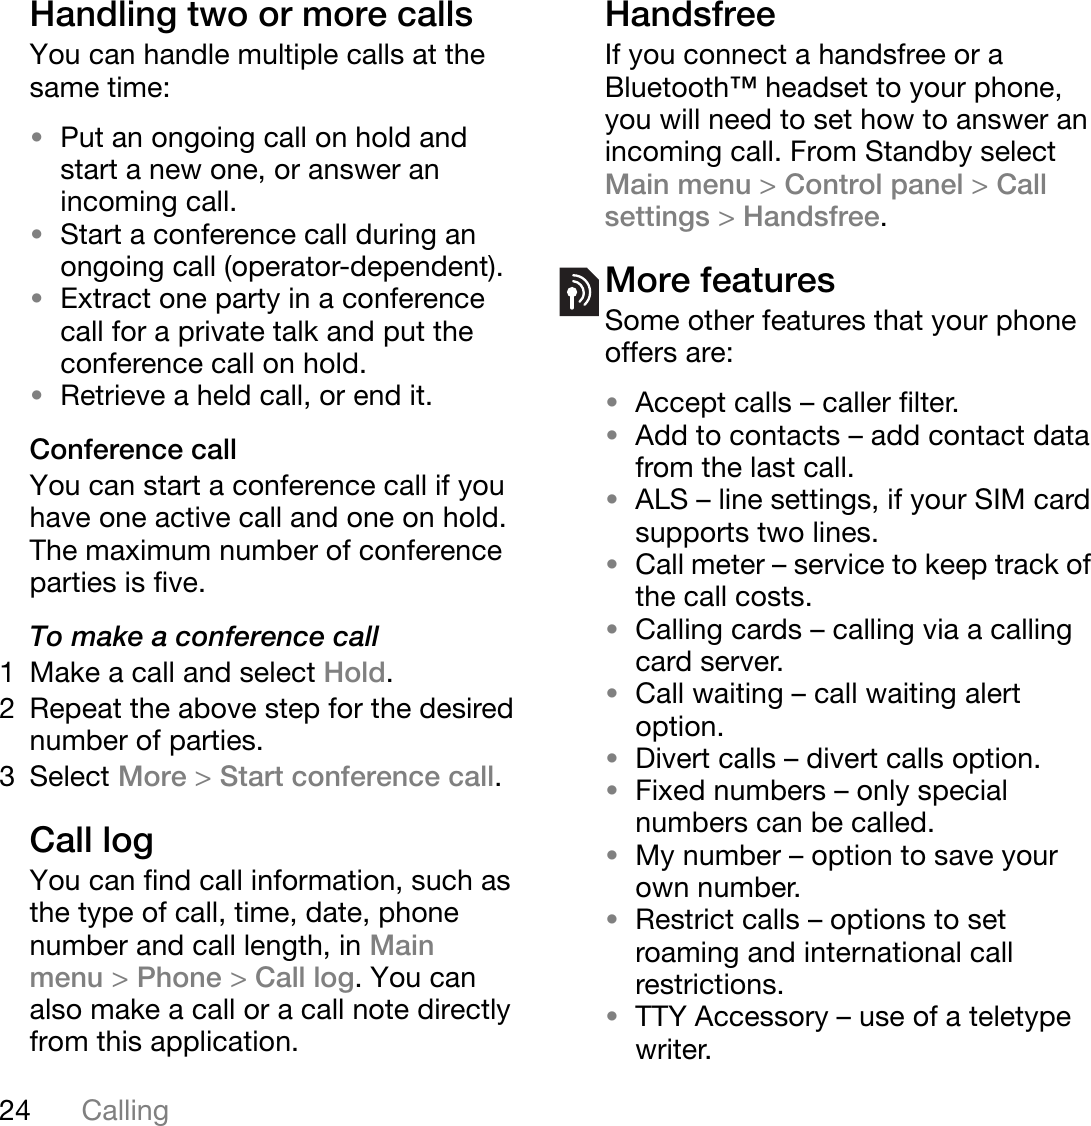 24 CallingThis is the Internet version of the user&apos;s guide. © Print only for private use.Handling two or more callsYou can handle multiple calls at the same time:•Put an ongoing call on hold and start a new one, or answer an incoming call.•Start a conference call during an ongoing call (operator-dependent).•Extract one party in a conference call for a private talk and put the conference call on hold.•Retrieve a held call, or end it. Conference callYou can start a conference call if you have one active call and one on hold. The maximum number of conference parties is five.To make a conference call1 Make a call and select Hold.2 Repeat the above step for the desired number of parties.3 Select More &gt;Start conference call.Call logYou can find call information, such as the type of call, time, date, phone number and call length, in Main menu &gt;Phone &gt;Call log. You can also make a call or a call note directly from this application.HandsfreeIf you connect a handsfree or a Bluetooth™ headset to your phone, you will need to set how to answer an incoming call. From Standby select Main menu &gt;Control panel &gt;Callsettings &gt;Handsfree.More featuresSome other features that your phone offers are:•Accept calls – caller filter.•Add to contacts – add contact data from the last call.•ALS – line settings, if your SIM card supports two lines.•Call meter – service to keep track of the call costs.•Calling cards – calling via a calling card server.•Call waiting – call waiting alert option.•Divert calls – divert calls option.•Fixed numbers – only special numbers can be called.•My number – option to save your own number.•Restrict calls – options to set roaming and international call restrictions.•TTY Accessory – use of a teletype writer.